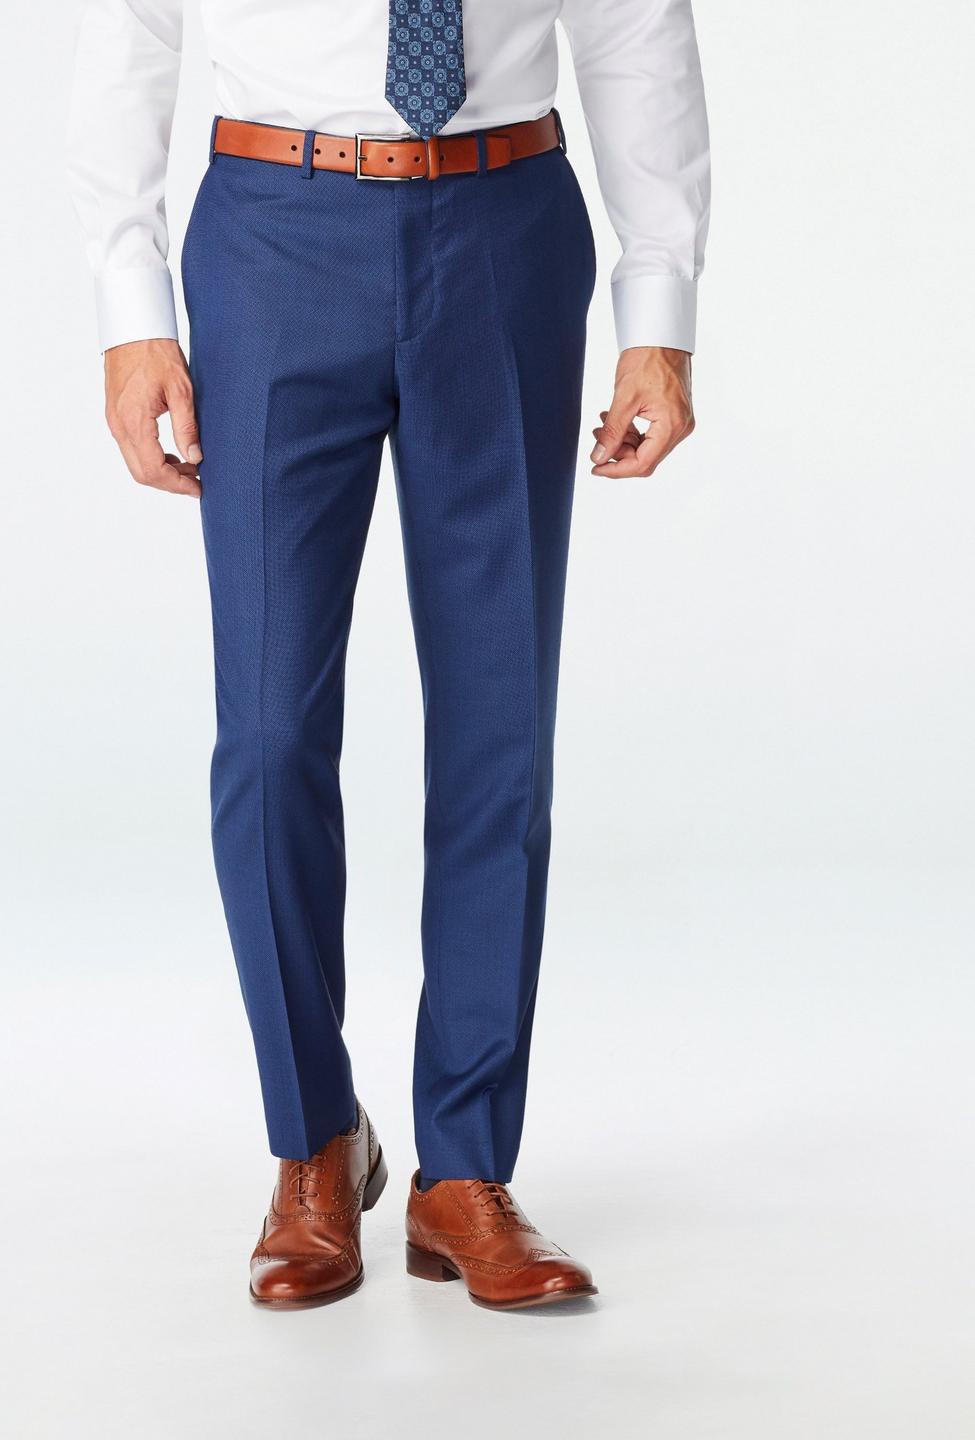 Blue pants - Highbridge Solid Design from Luxury Indochino Collection